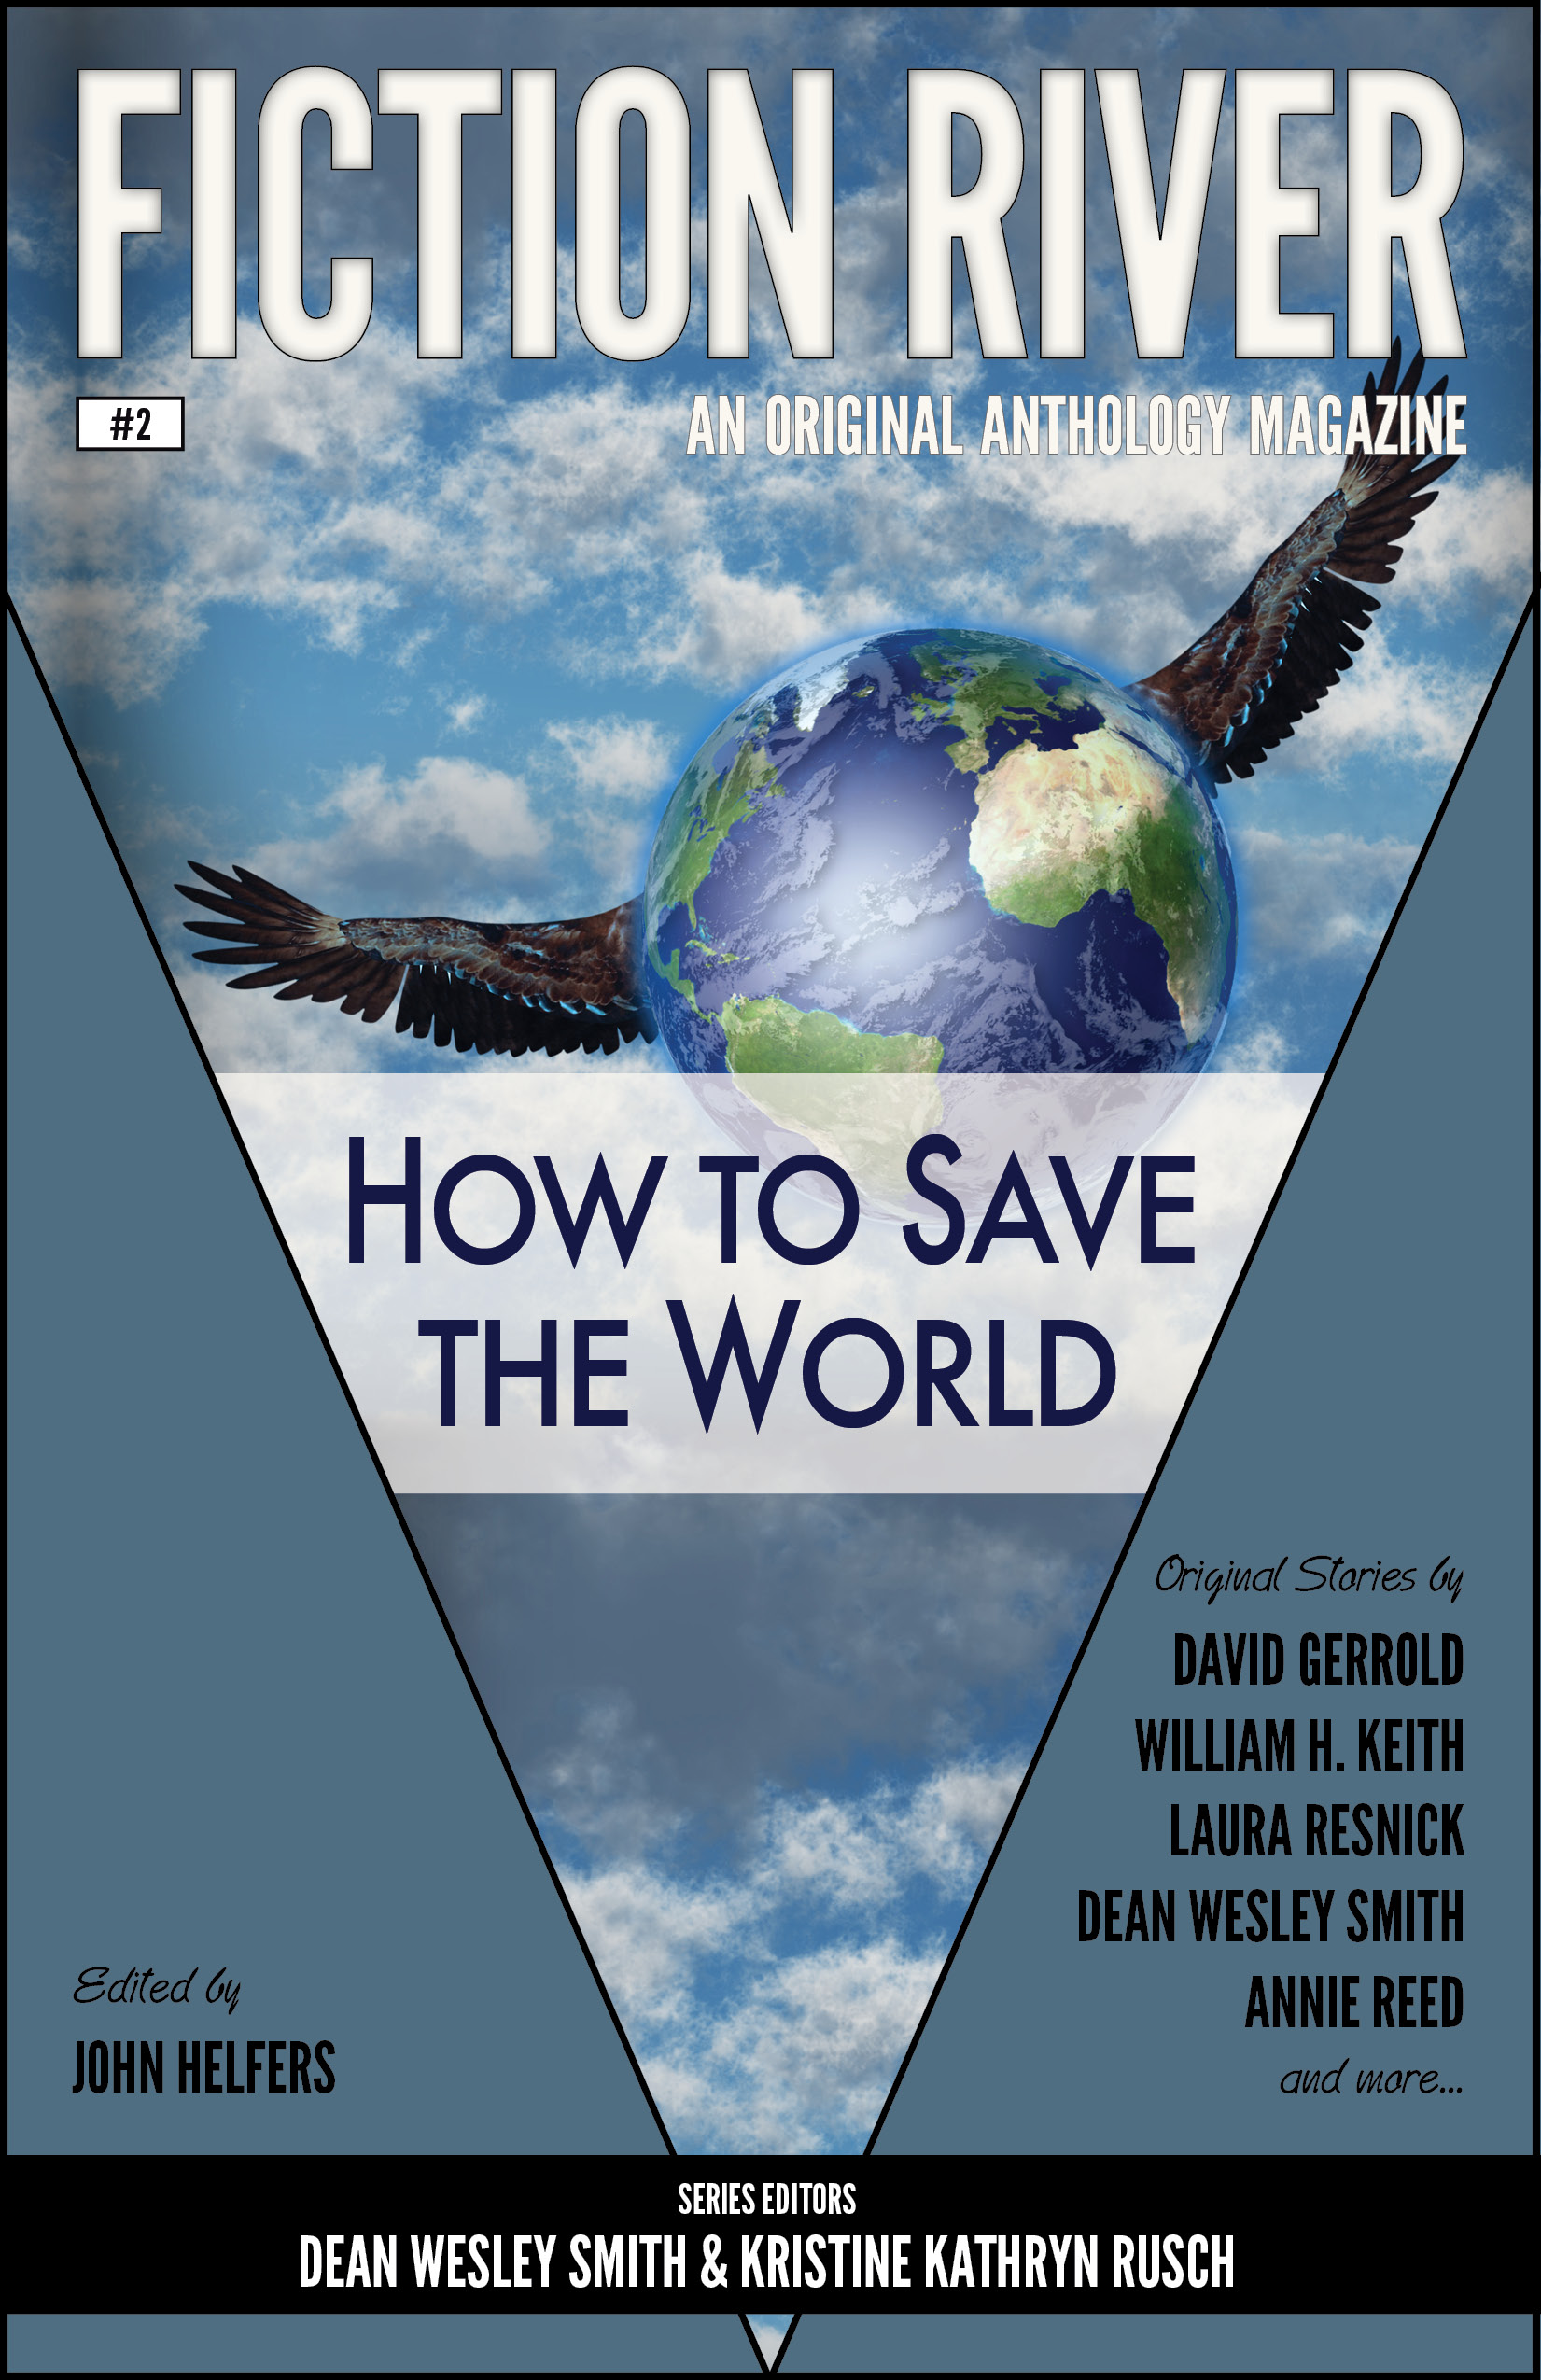 FR How to Save the World ebook cover